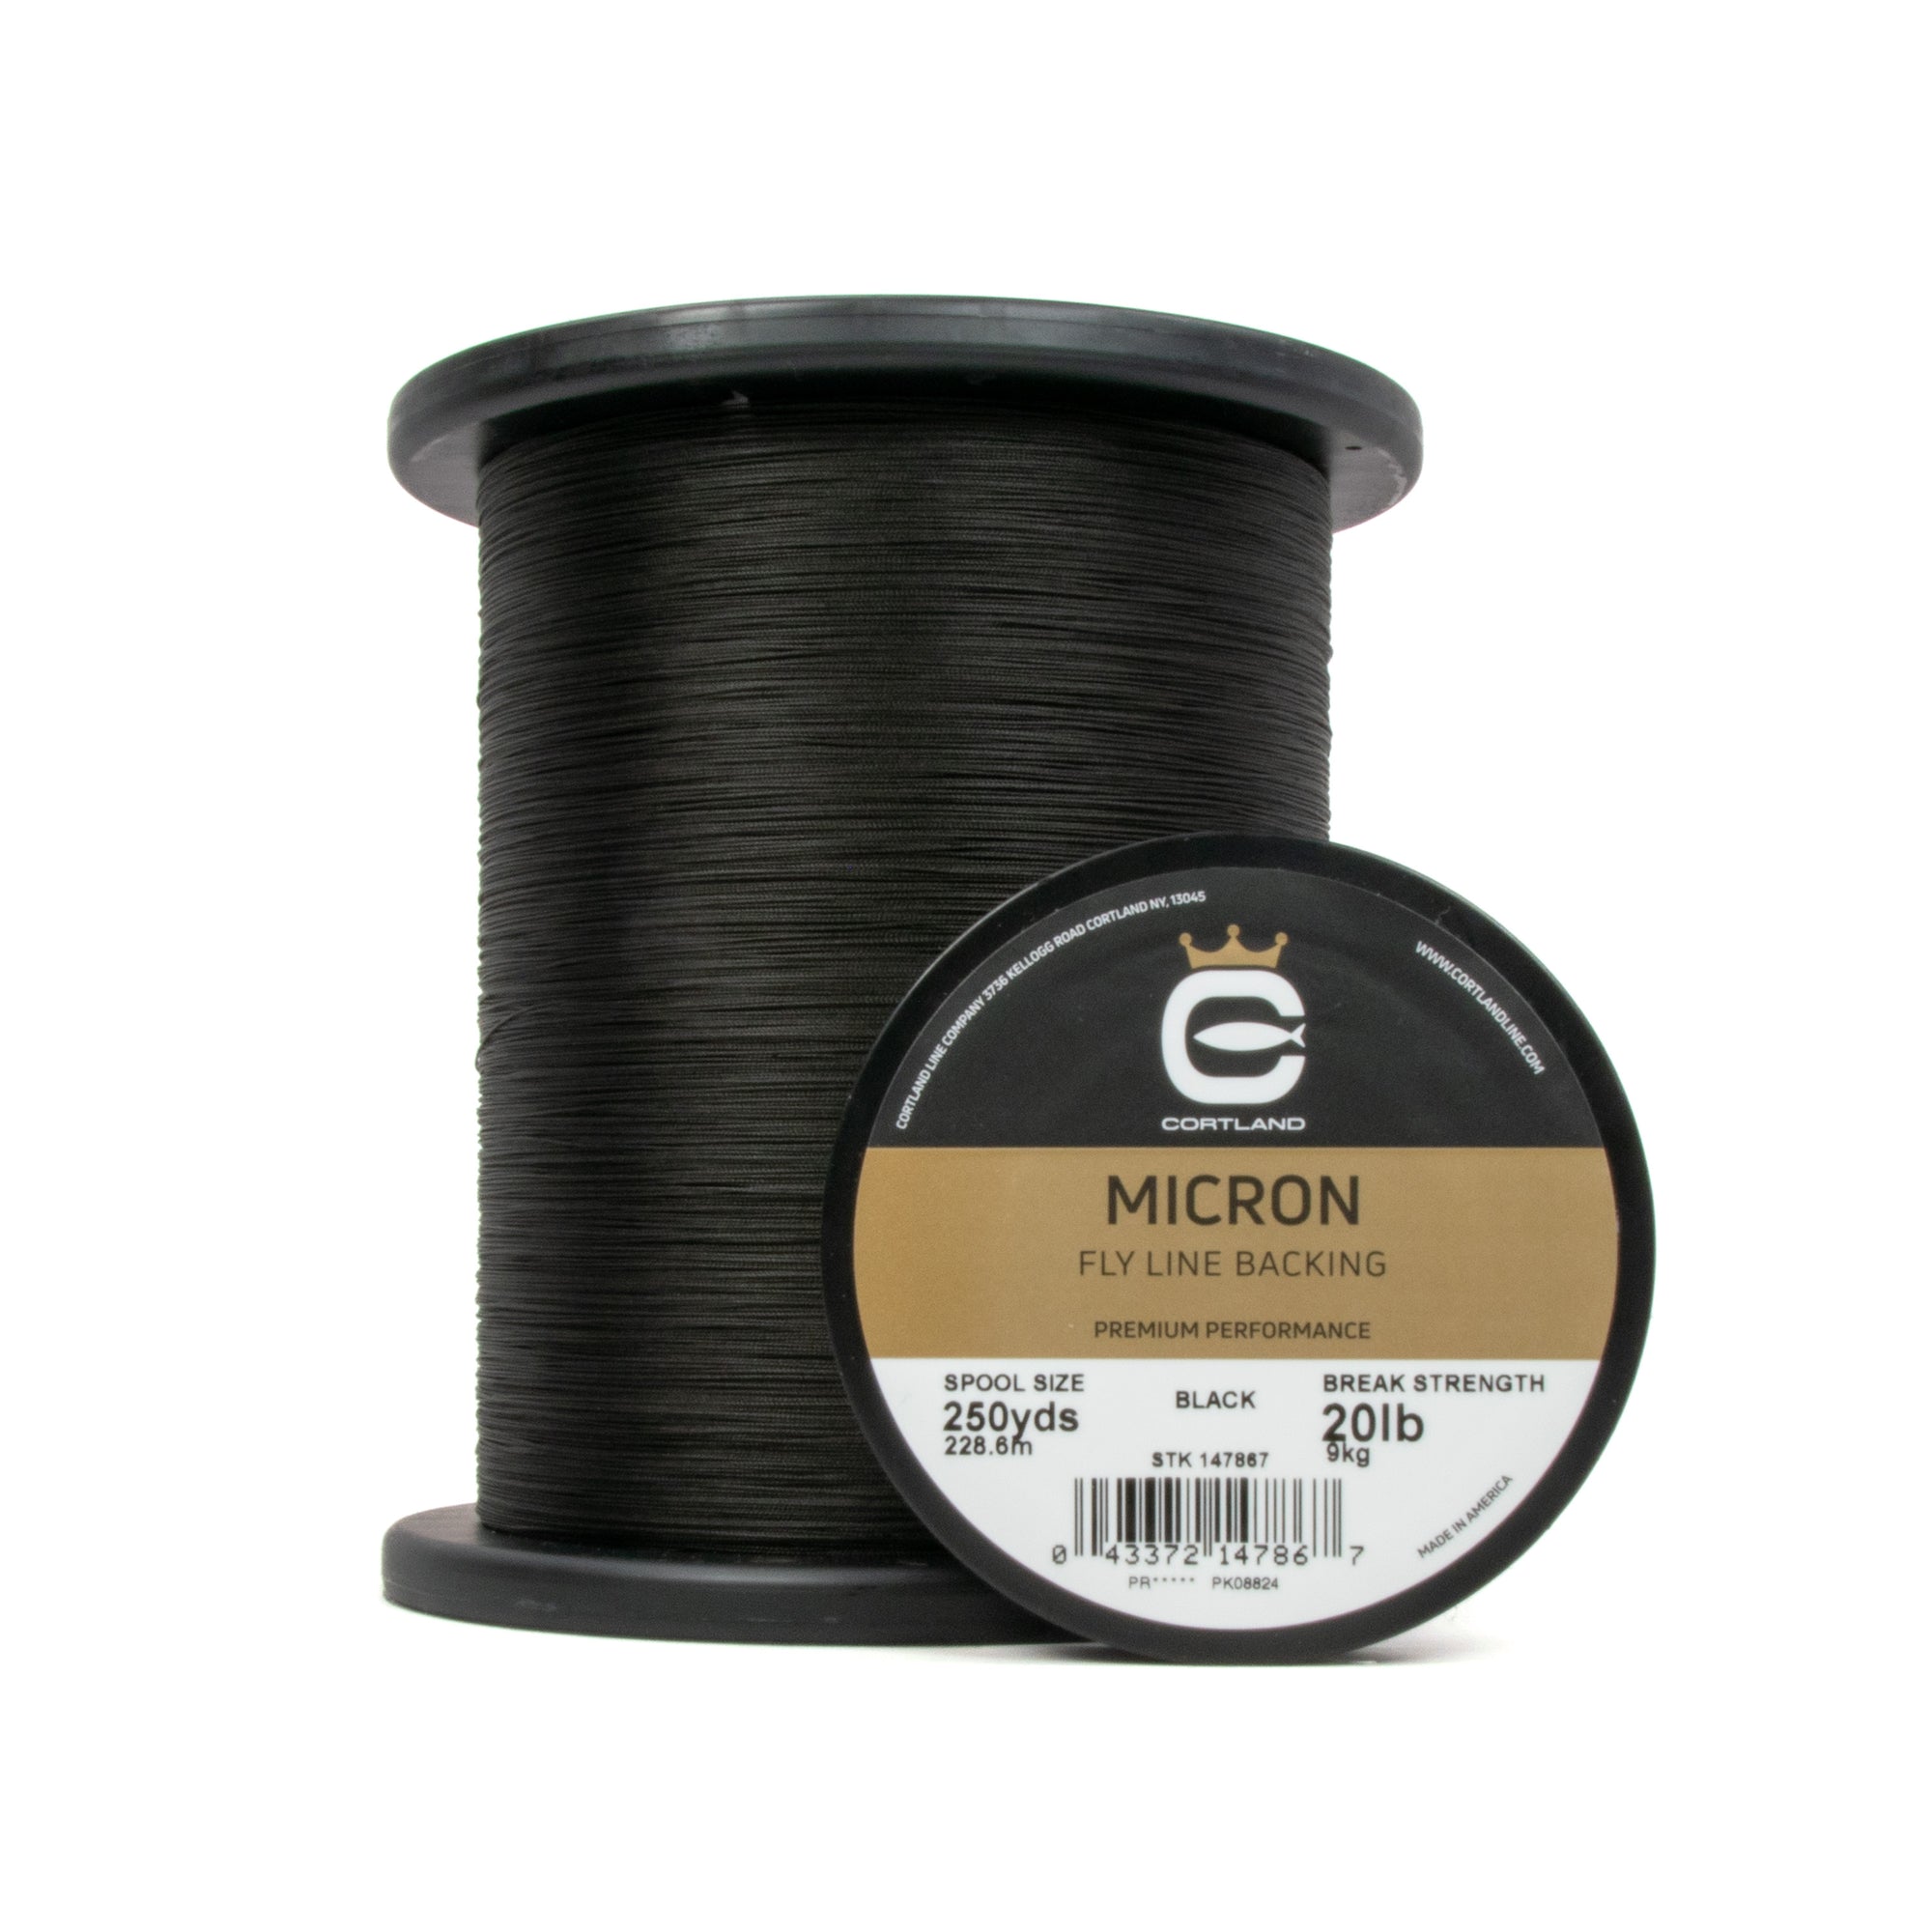 Micron Fly Line Backing - Black